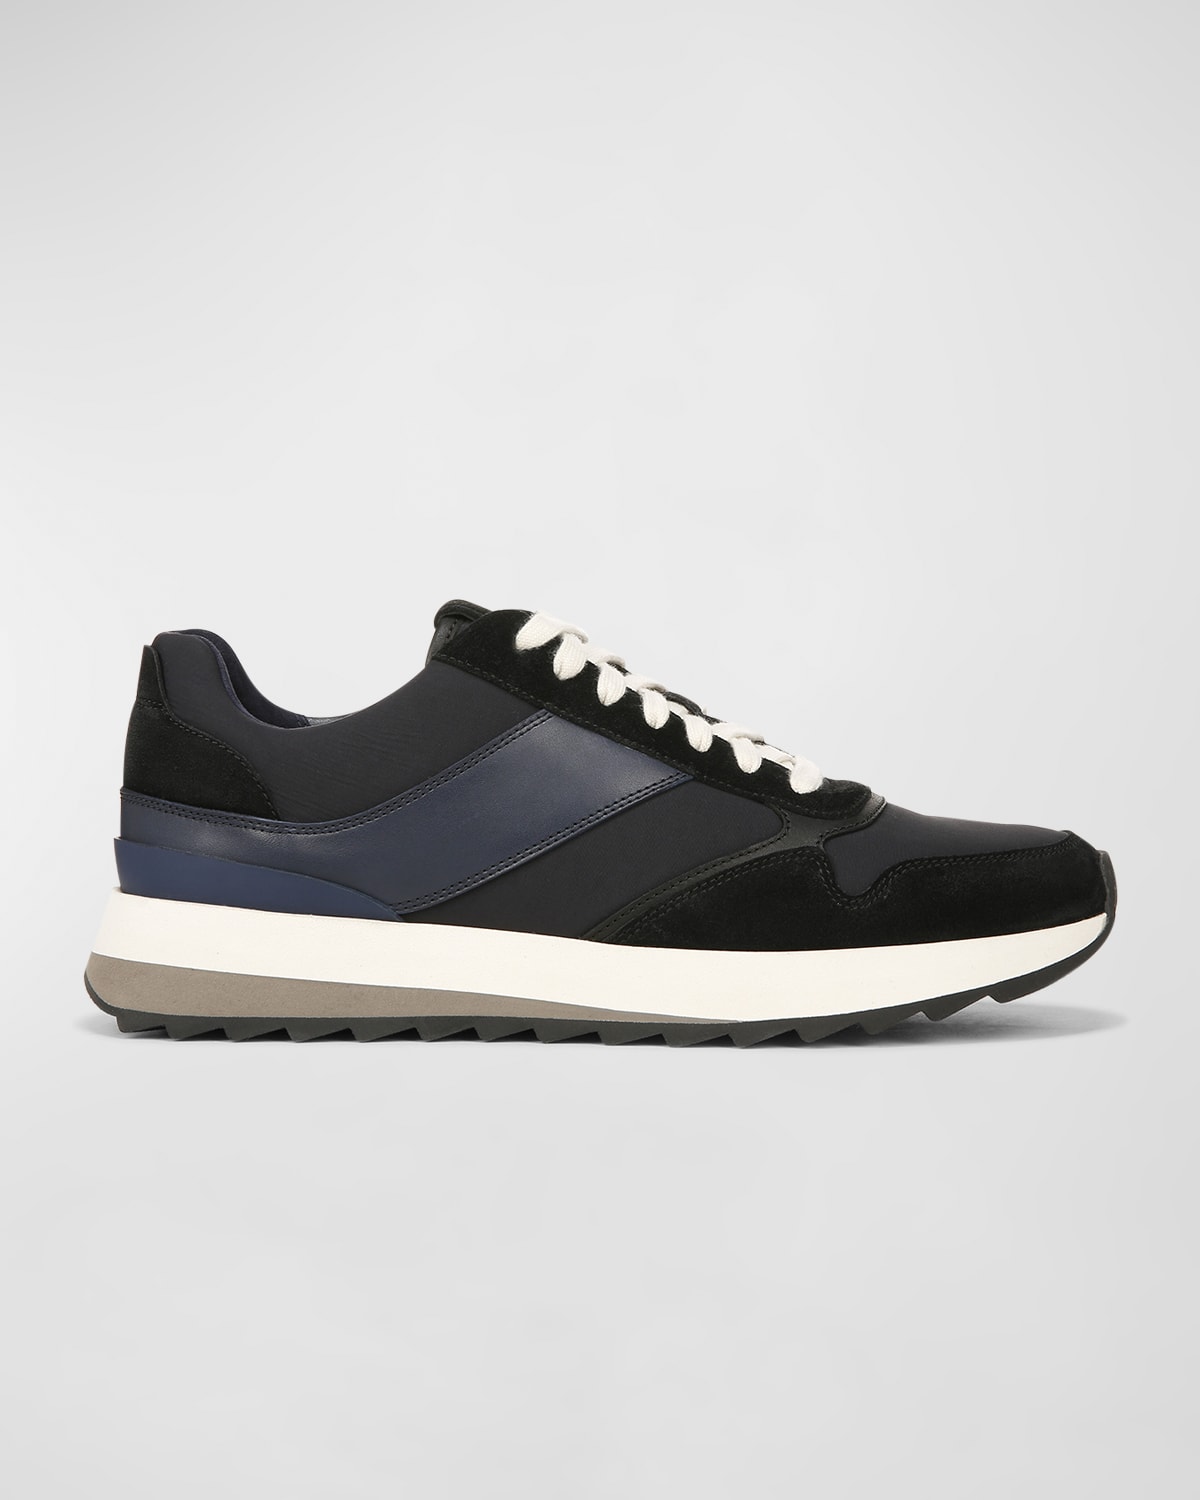 Men's Edric Vintage Leather and Suede Sneakers